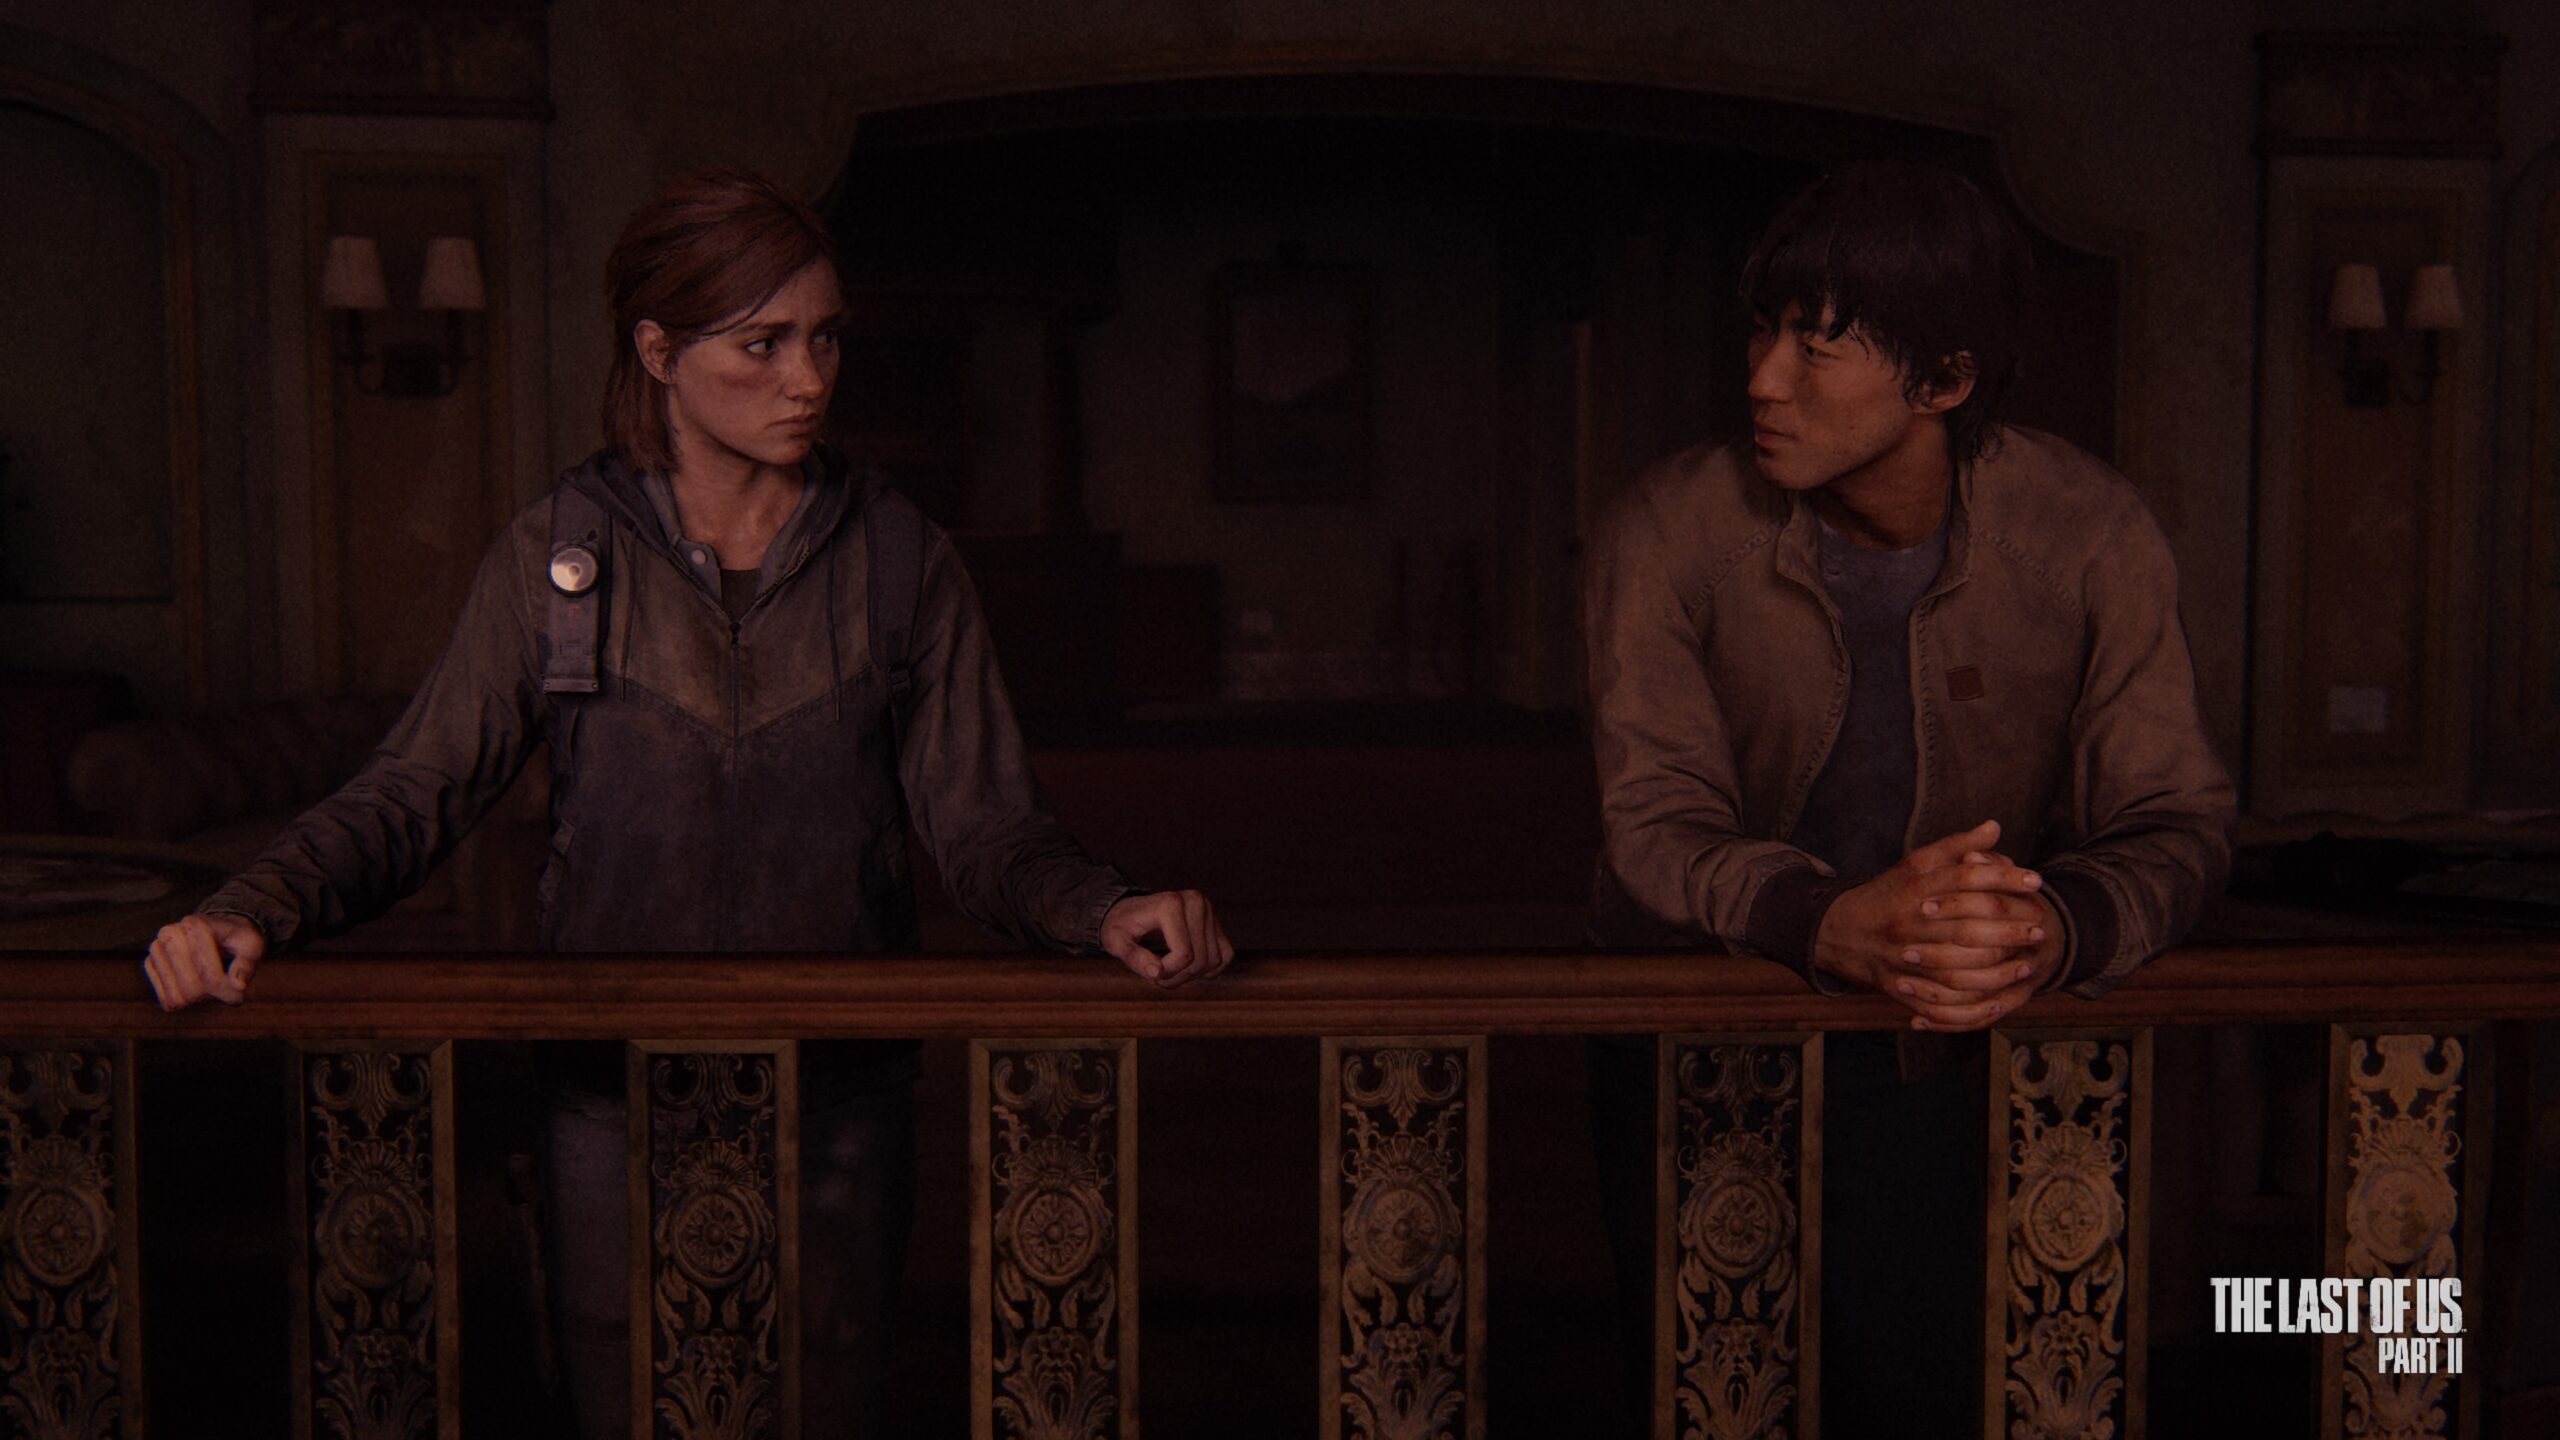 Last Of Us 2 Abby Finds Out Lev is Transgender Yara Tells Abby Sad Moment  They Are Brother & Sisters 